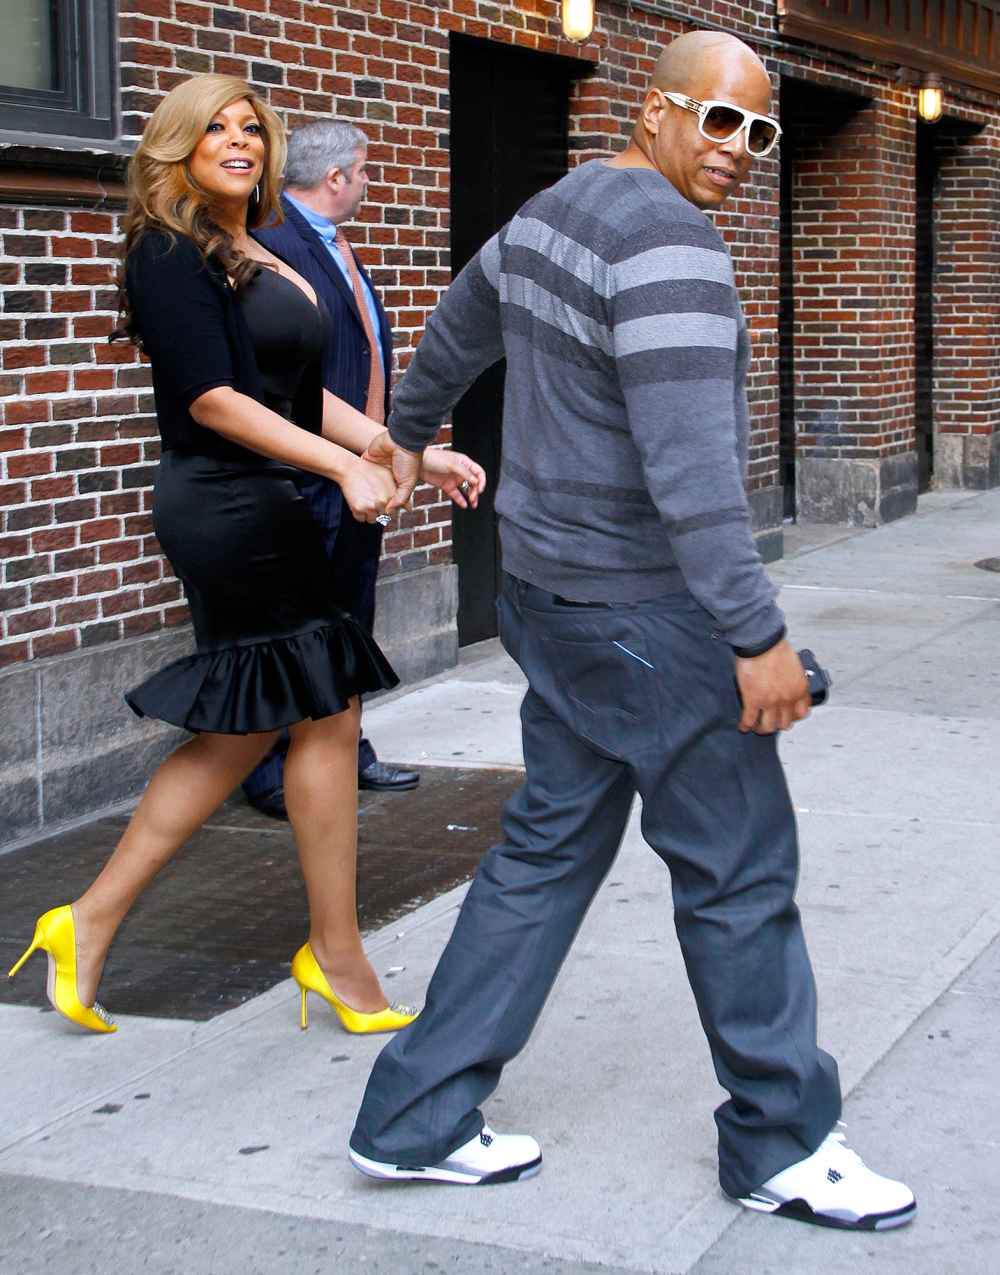 Wendy-Williams-Steps-Out-With-Husband-Kevin-Hunter-After-Reported-Hospitalization